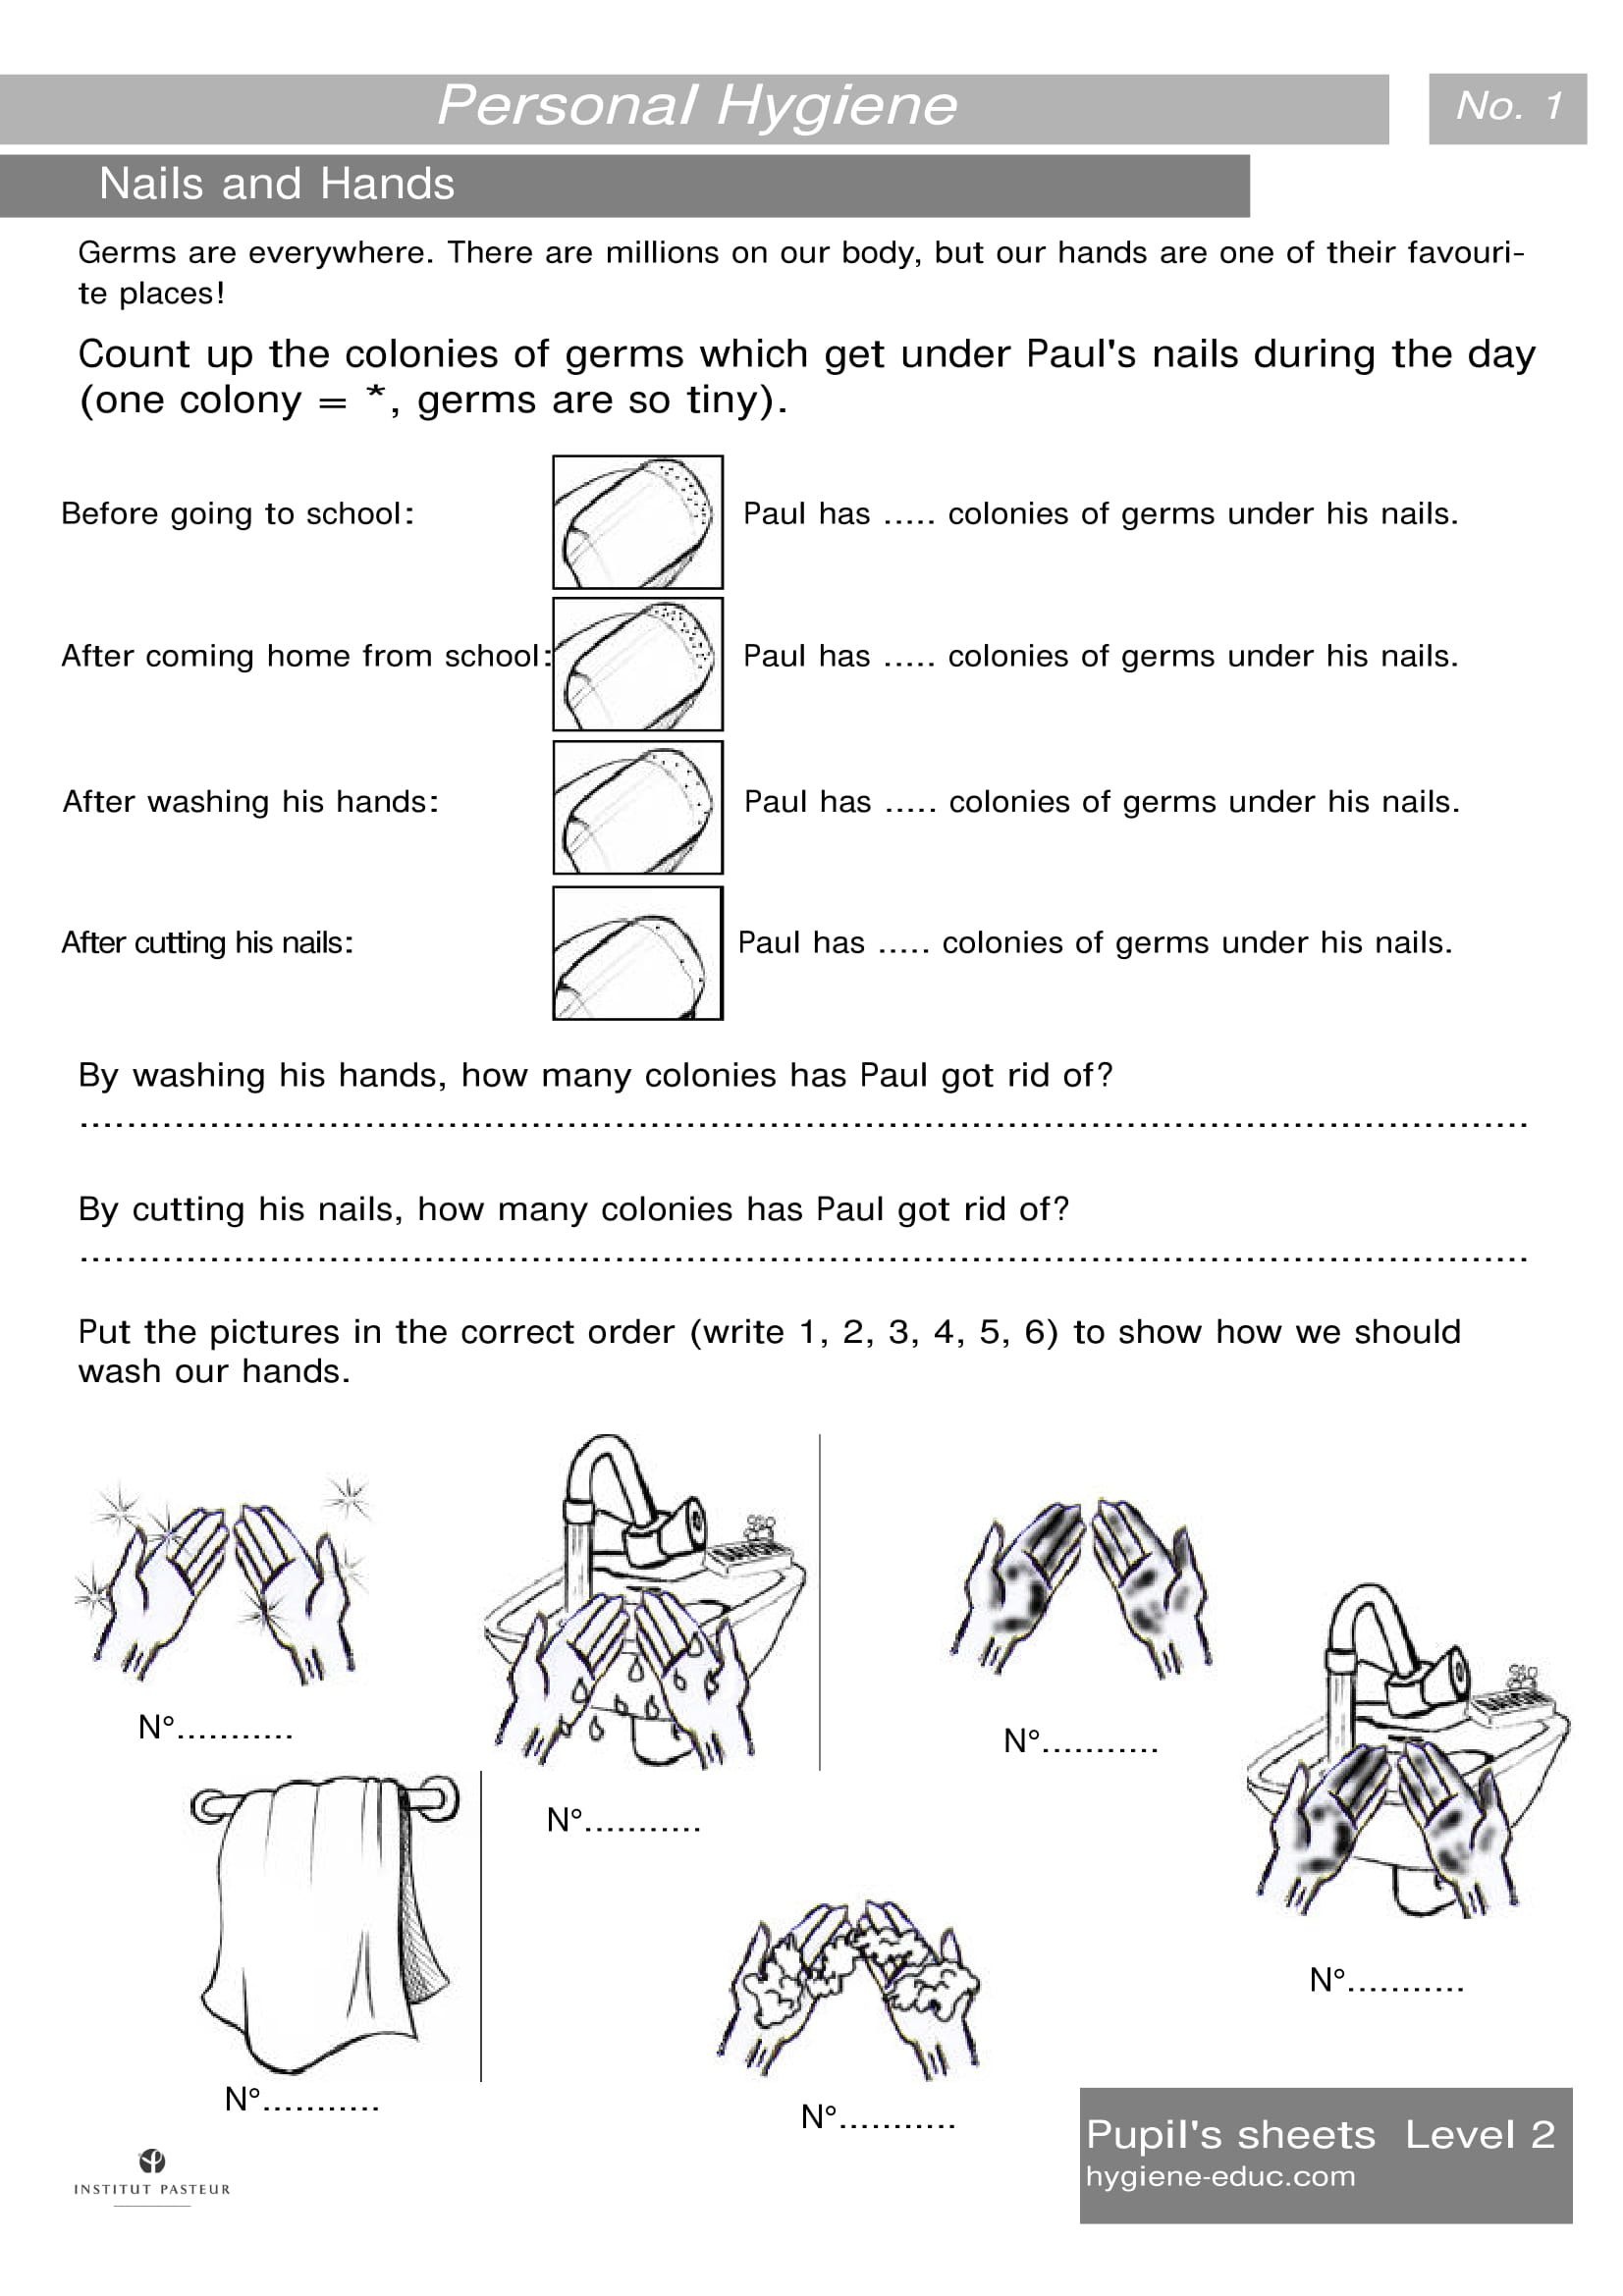 Personal Hygiene Worksheets Level 2 Nails And Hands -- Hand Hygiene - Free Printable Personal Hygiene Worksheets